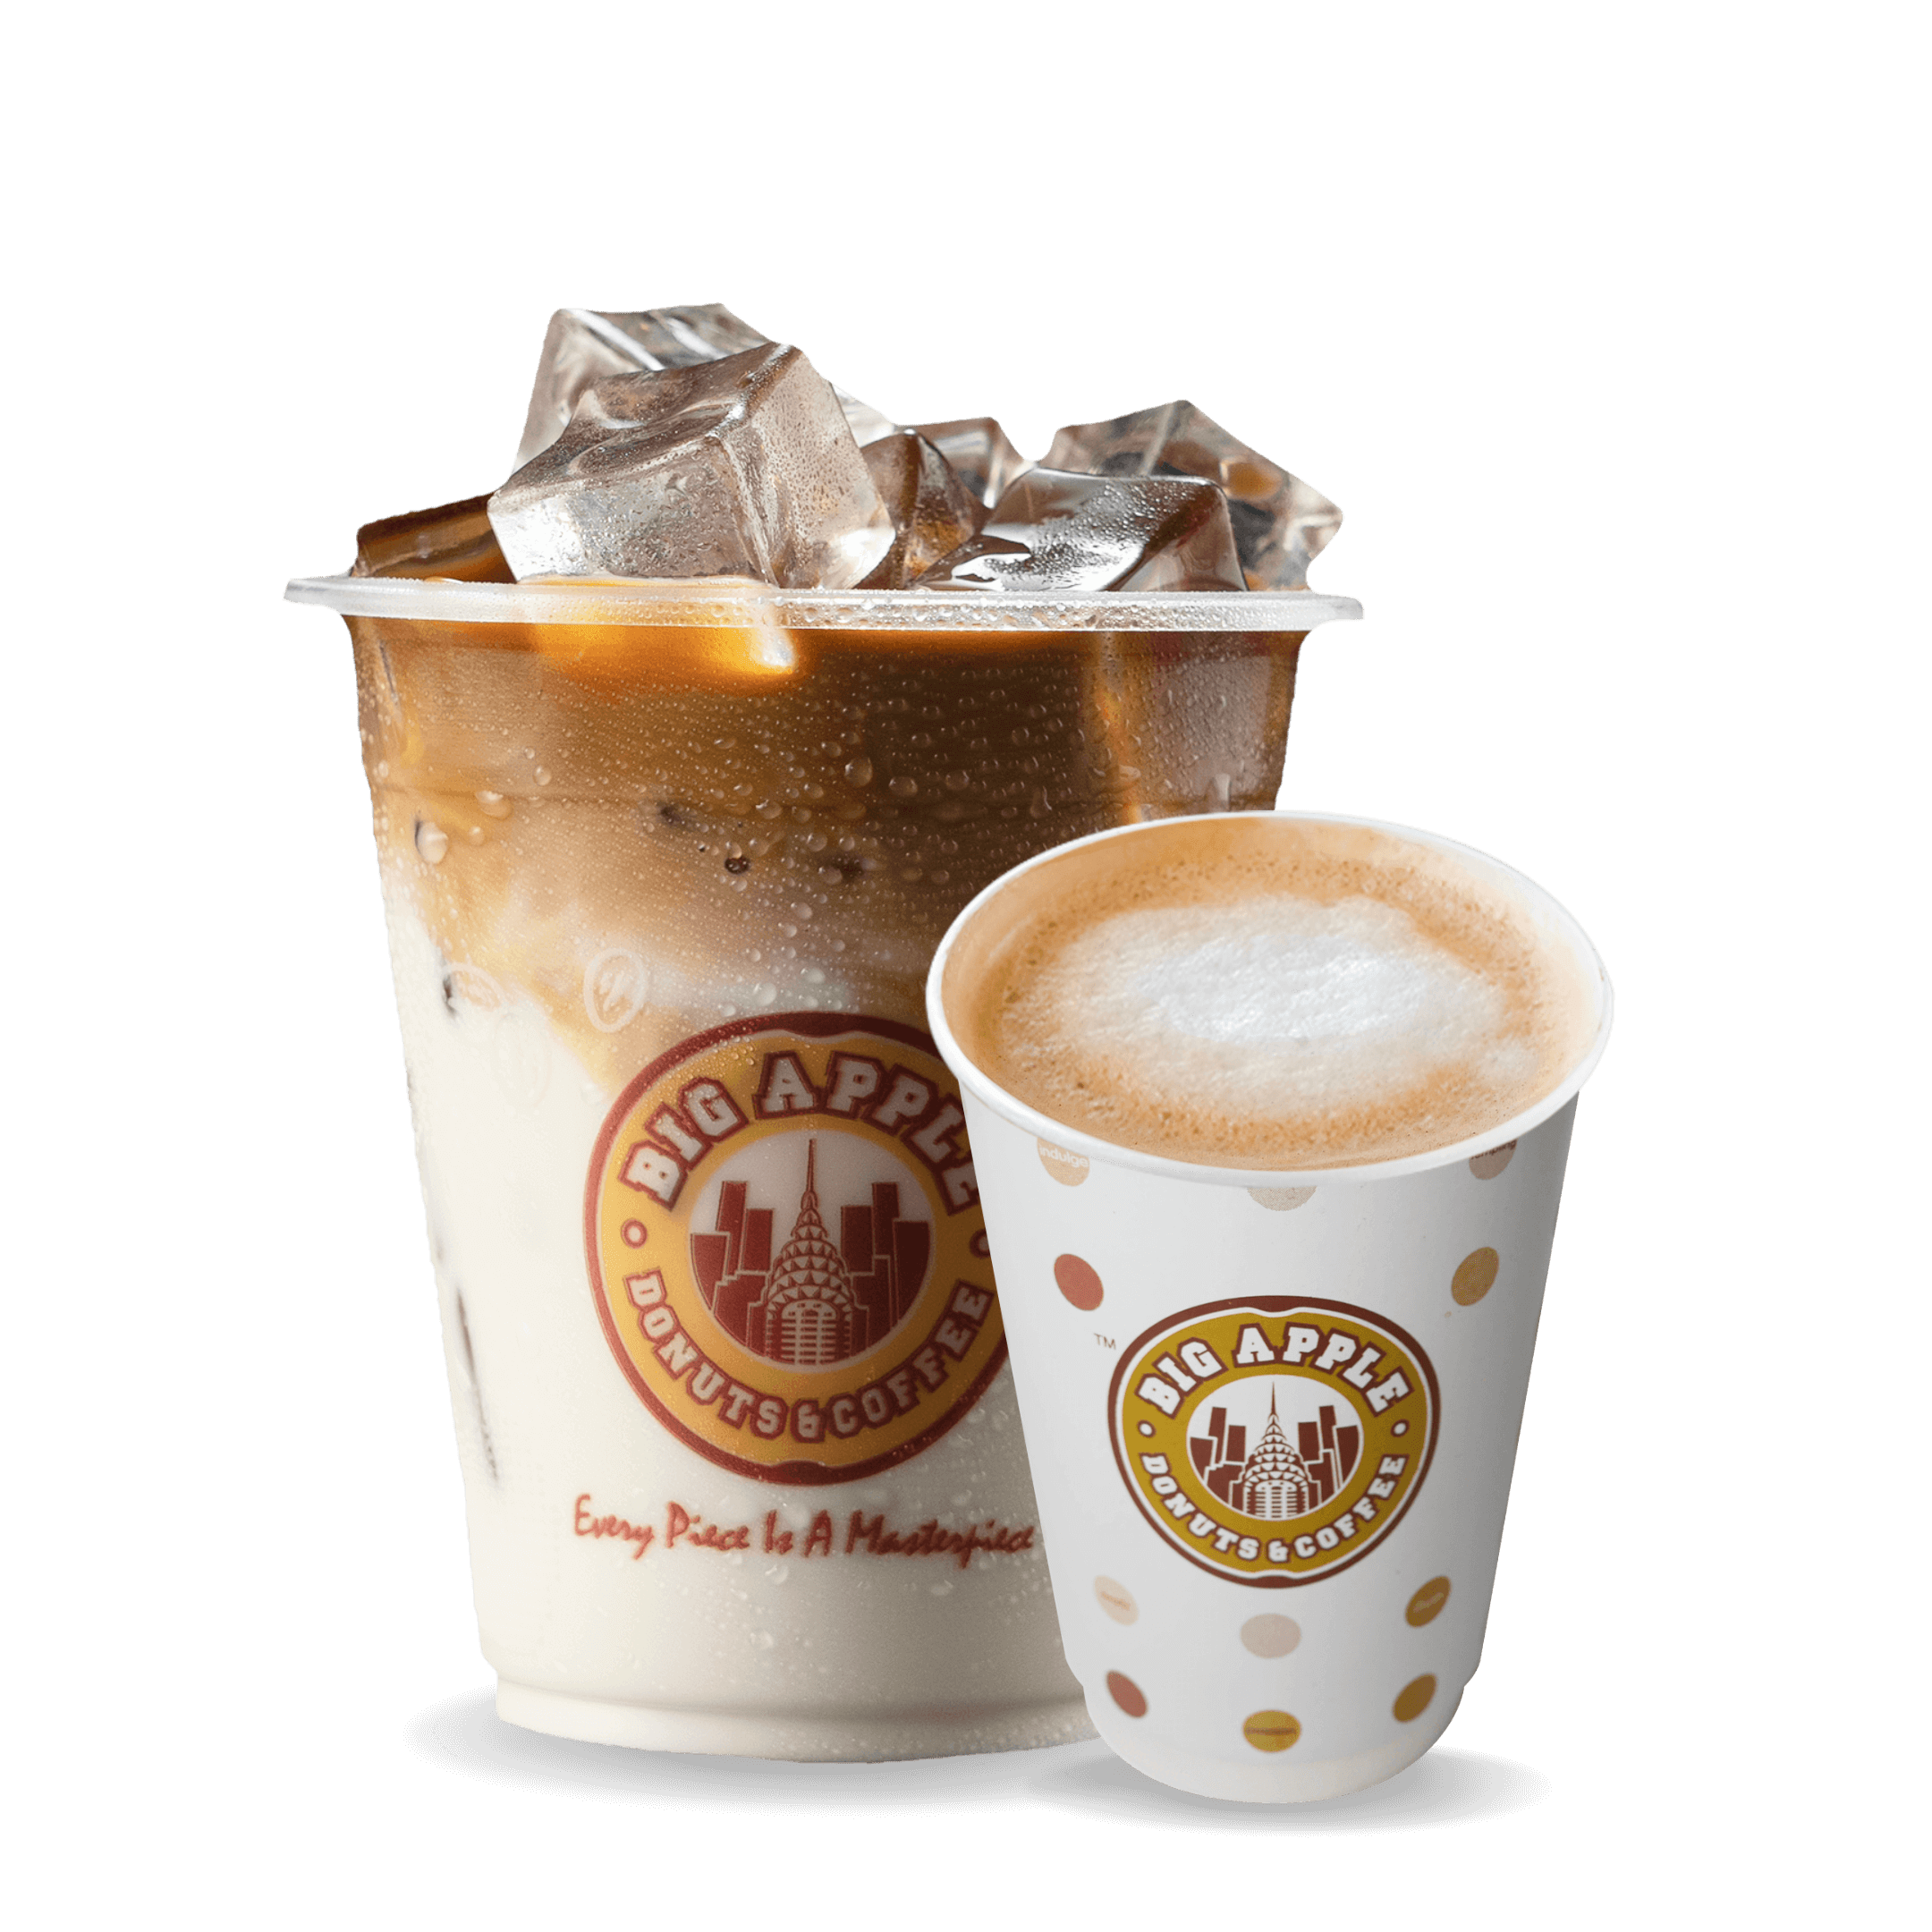 Big Apple Donuts & Coffee's New Beverages, Hazelnut Latte Cold & Hot